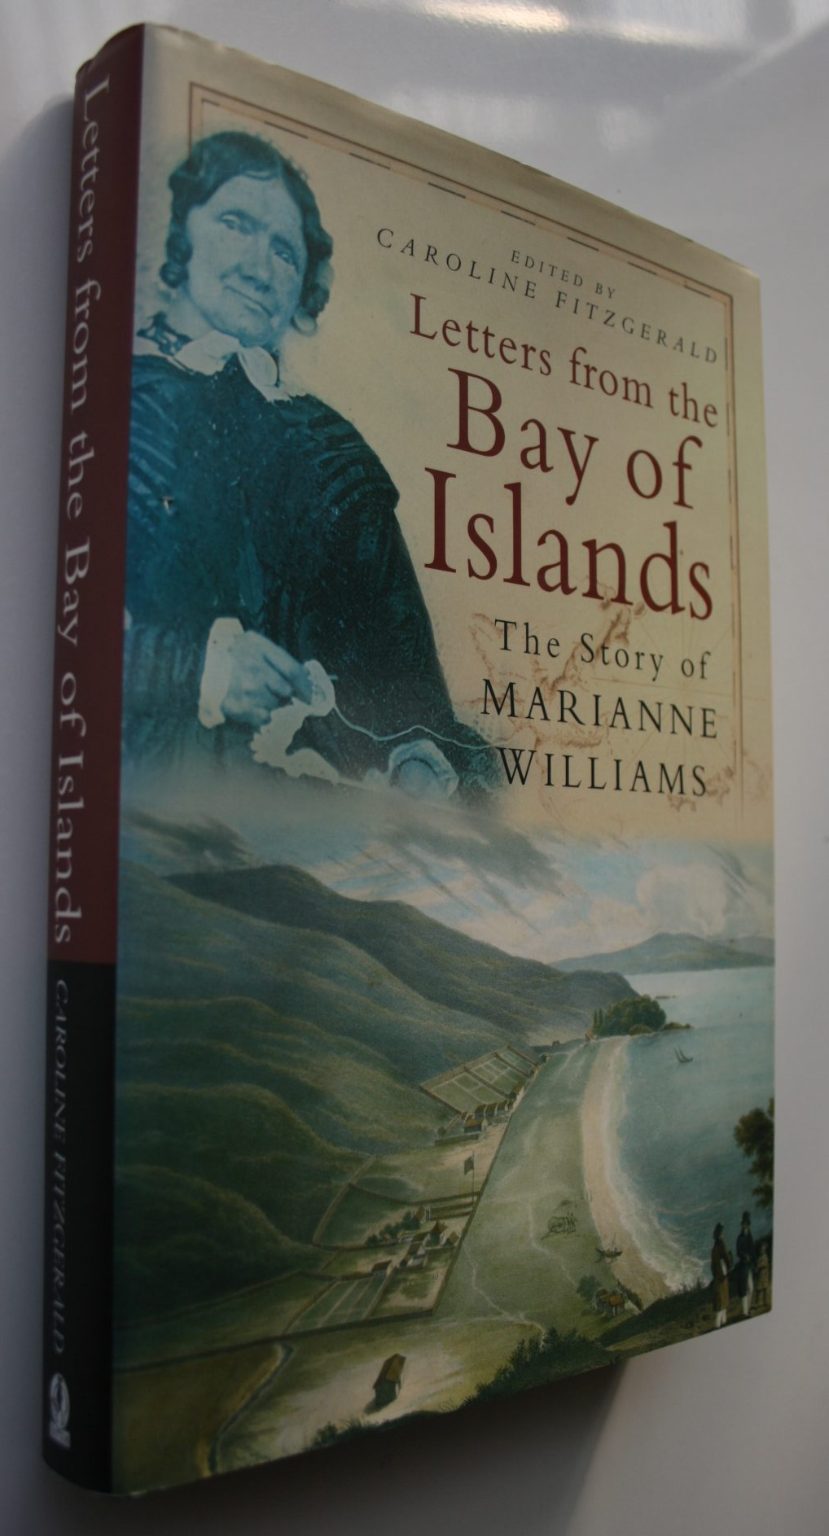 Letters from the Bay of Islands, The Story of Marianne Williams by Caroline Fitzgerald [editor]. first edition. SCARCE IN HARDBACK.